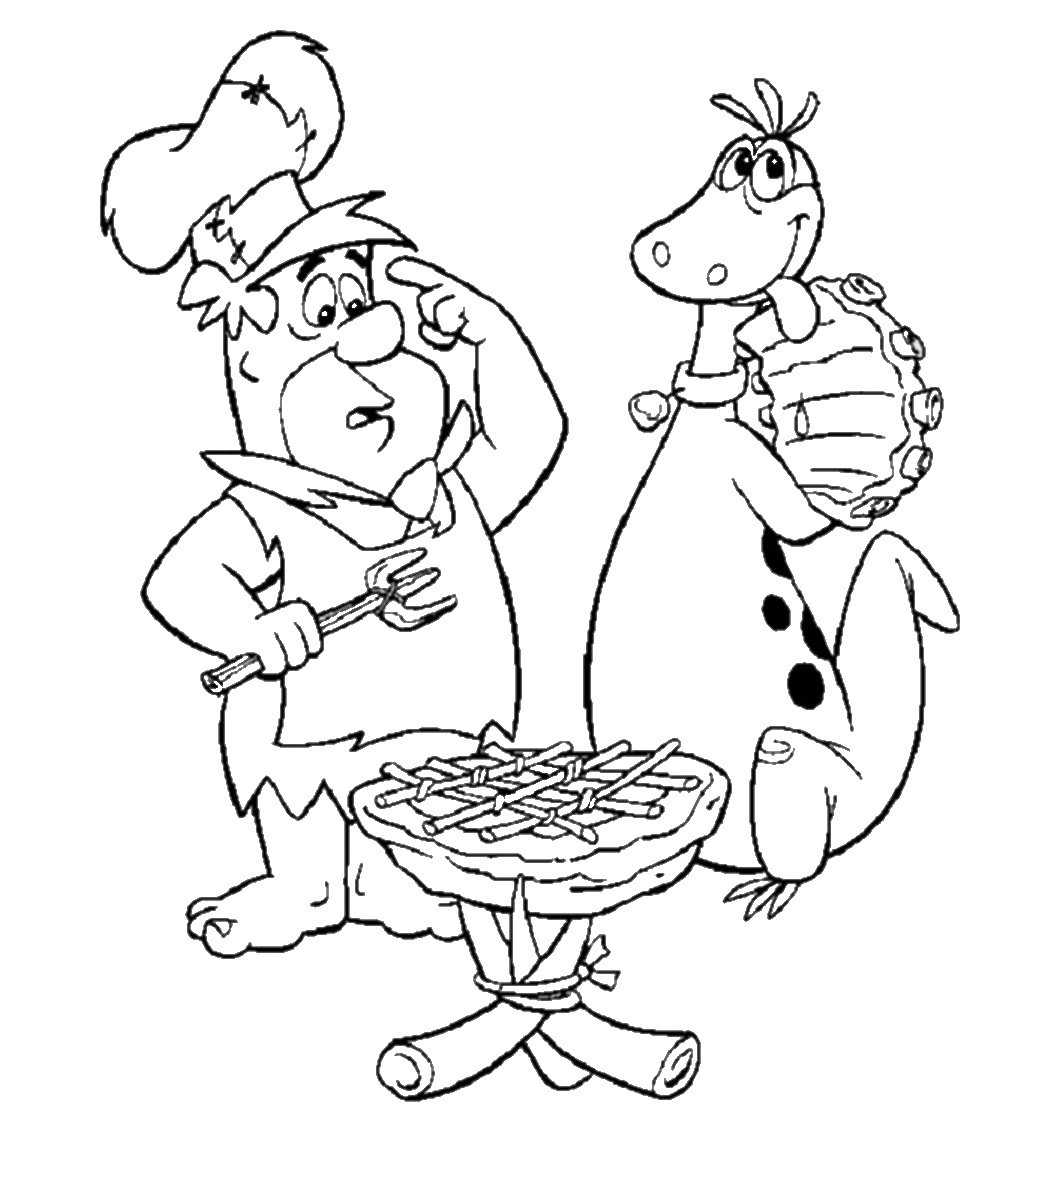 Free Printable Coloring Book
 The Flintstones Coloring Pages